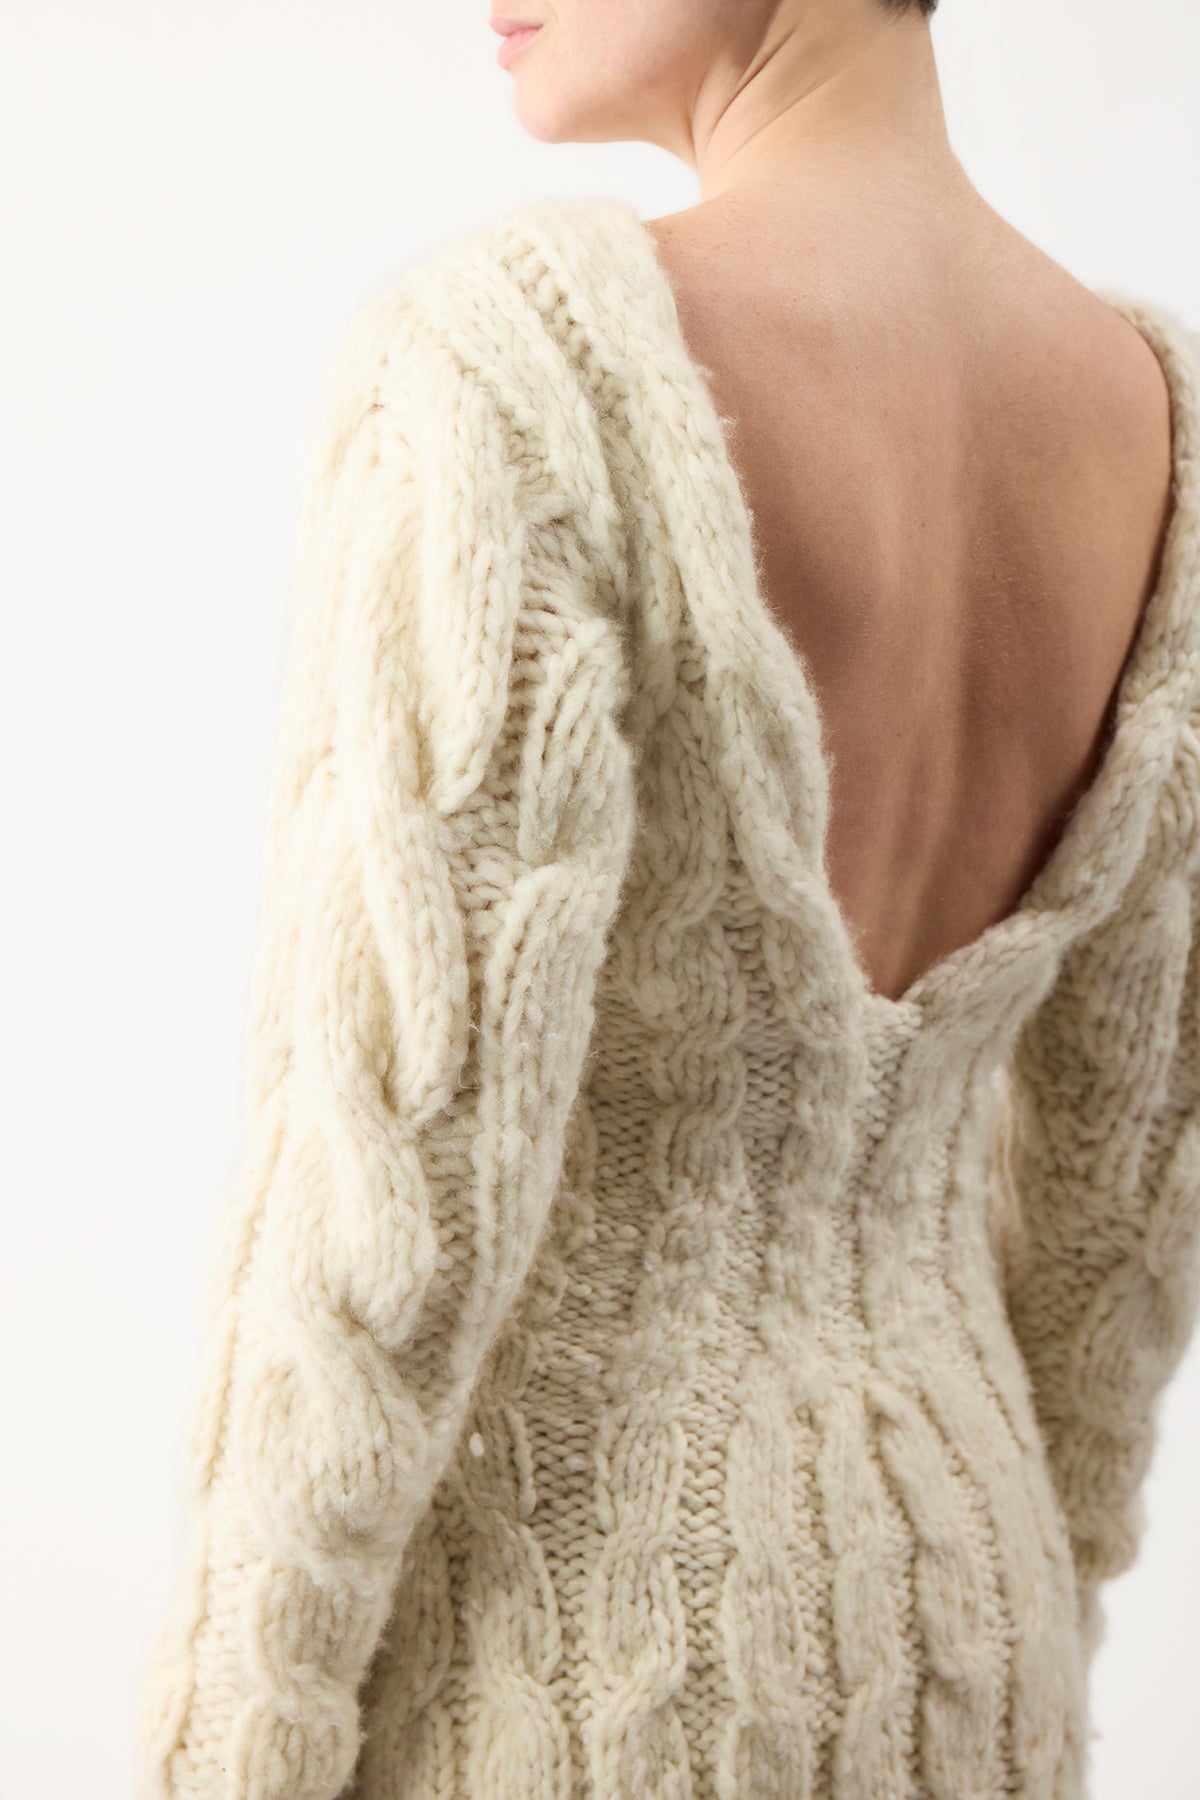 Buy PIECES Cream Chunky Cable Knitted Jumper Dress from the Next